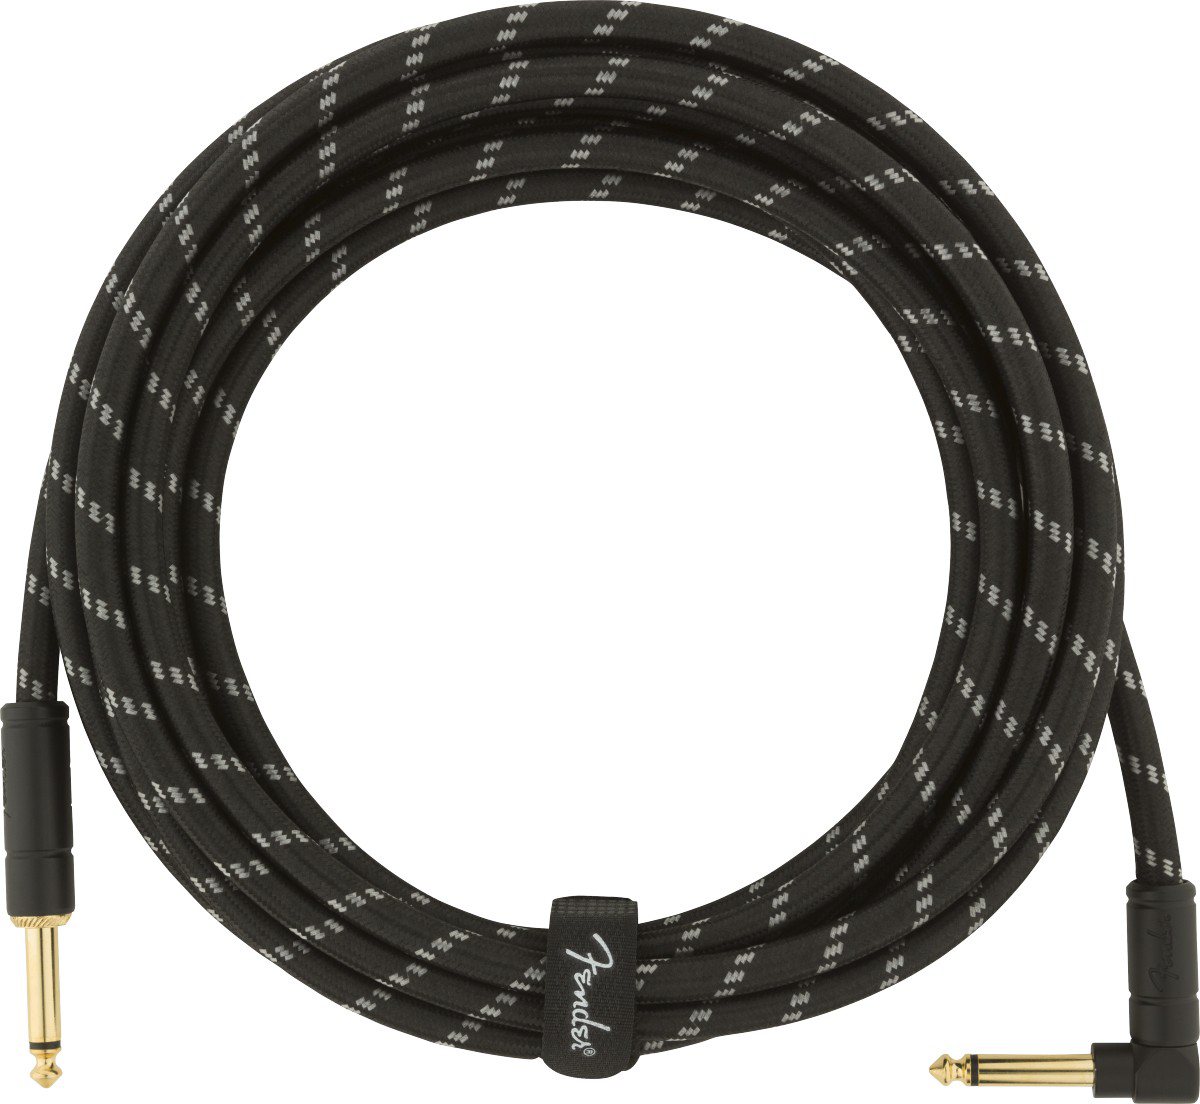 An image of Fender Deluxe Instrument Cable, Straight/Angle, 15ft Black Tweed | PMT Online